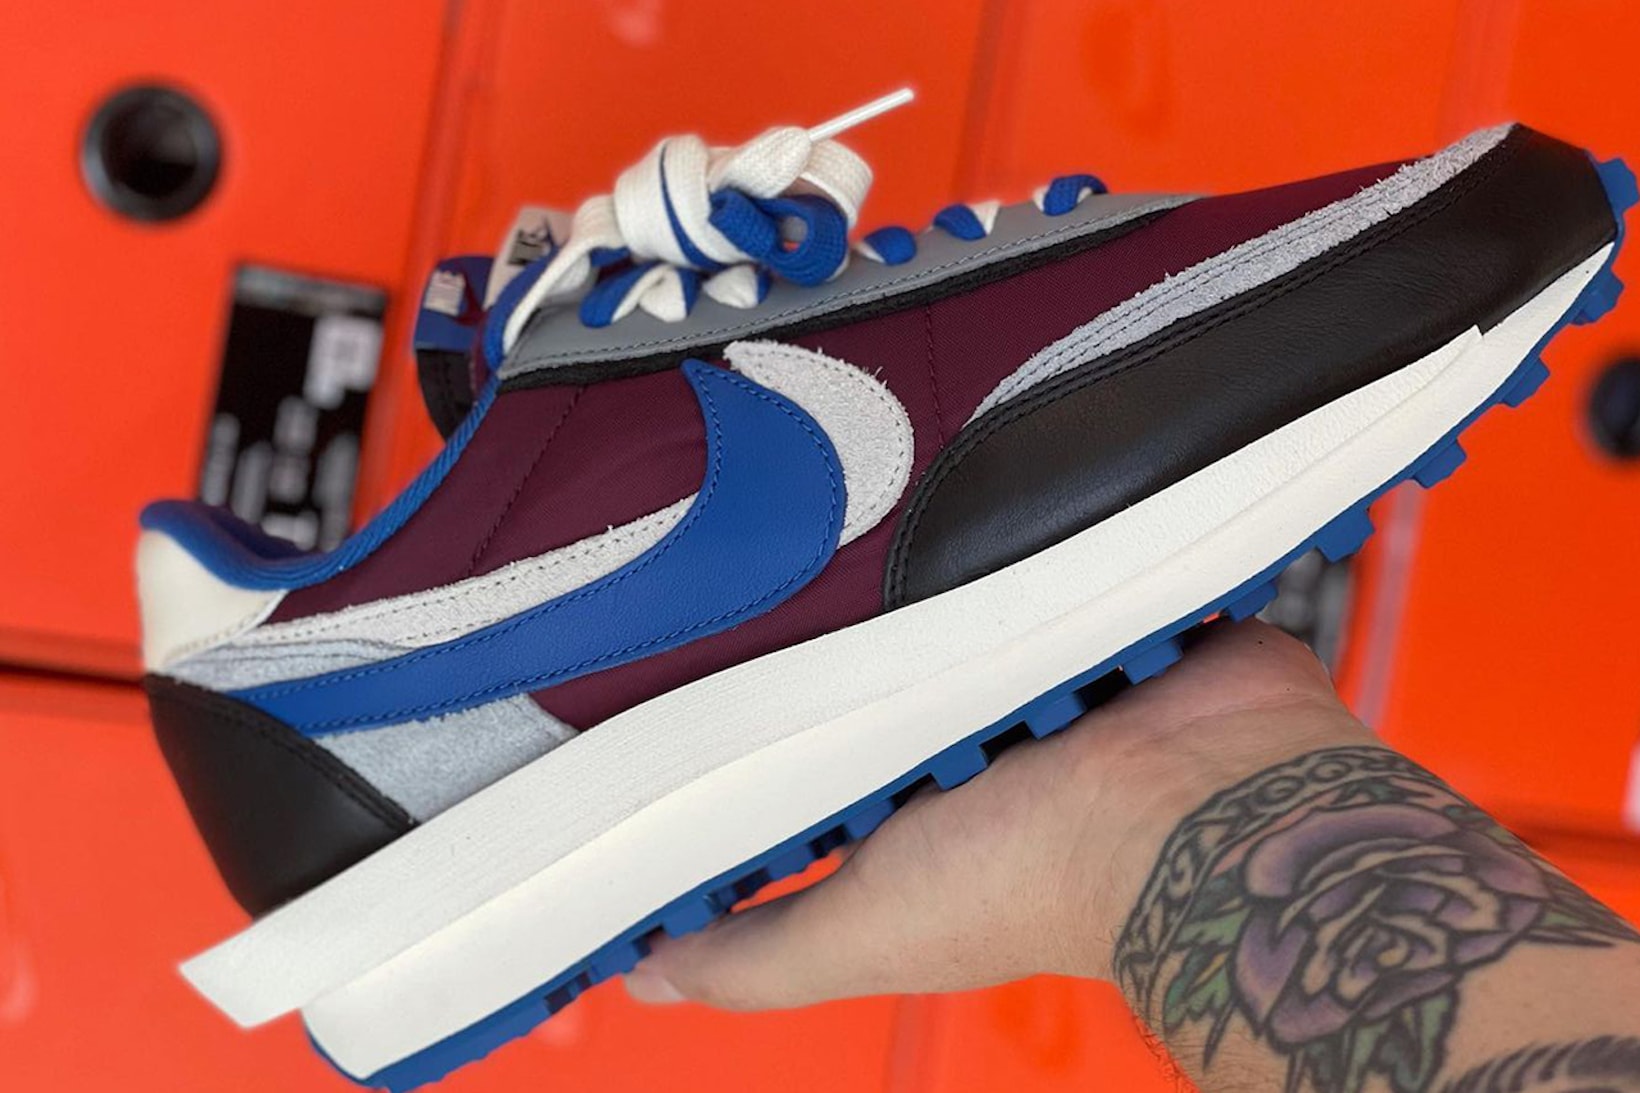 sacai UNDERCOVER Nike LDWaffle Collaboration Sneakers Footwear Shoes Night maroon blue black white